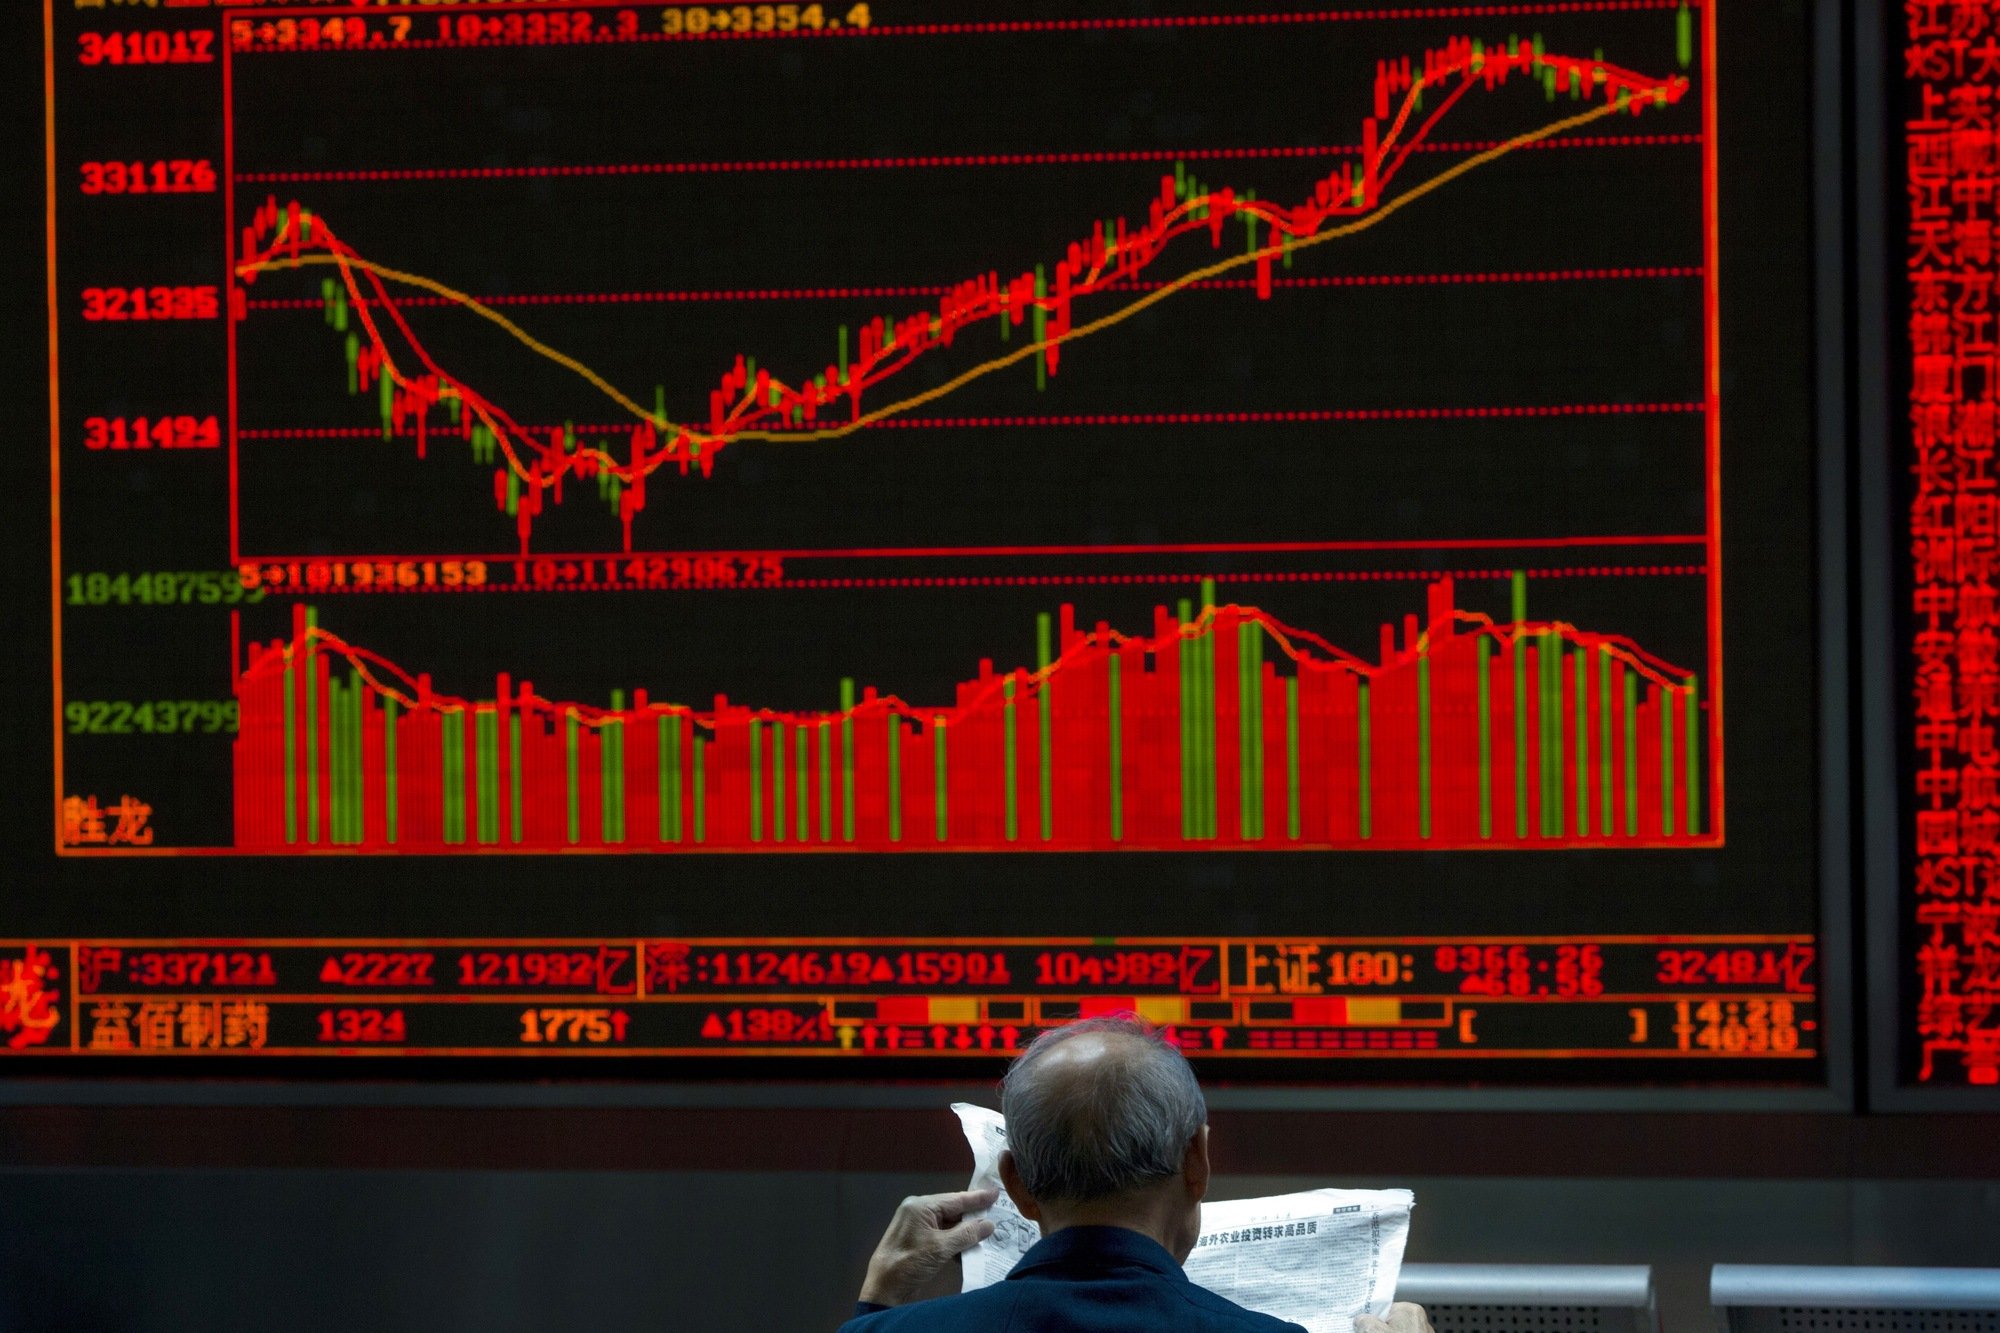 $46 Billion Flows into Chinese Stock Market, Should Launch Dow Higher